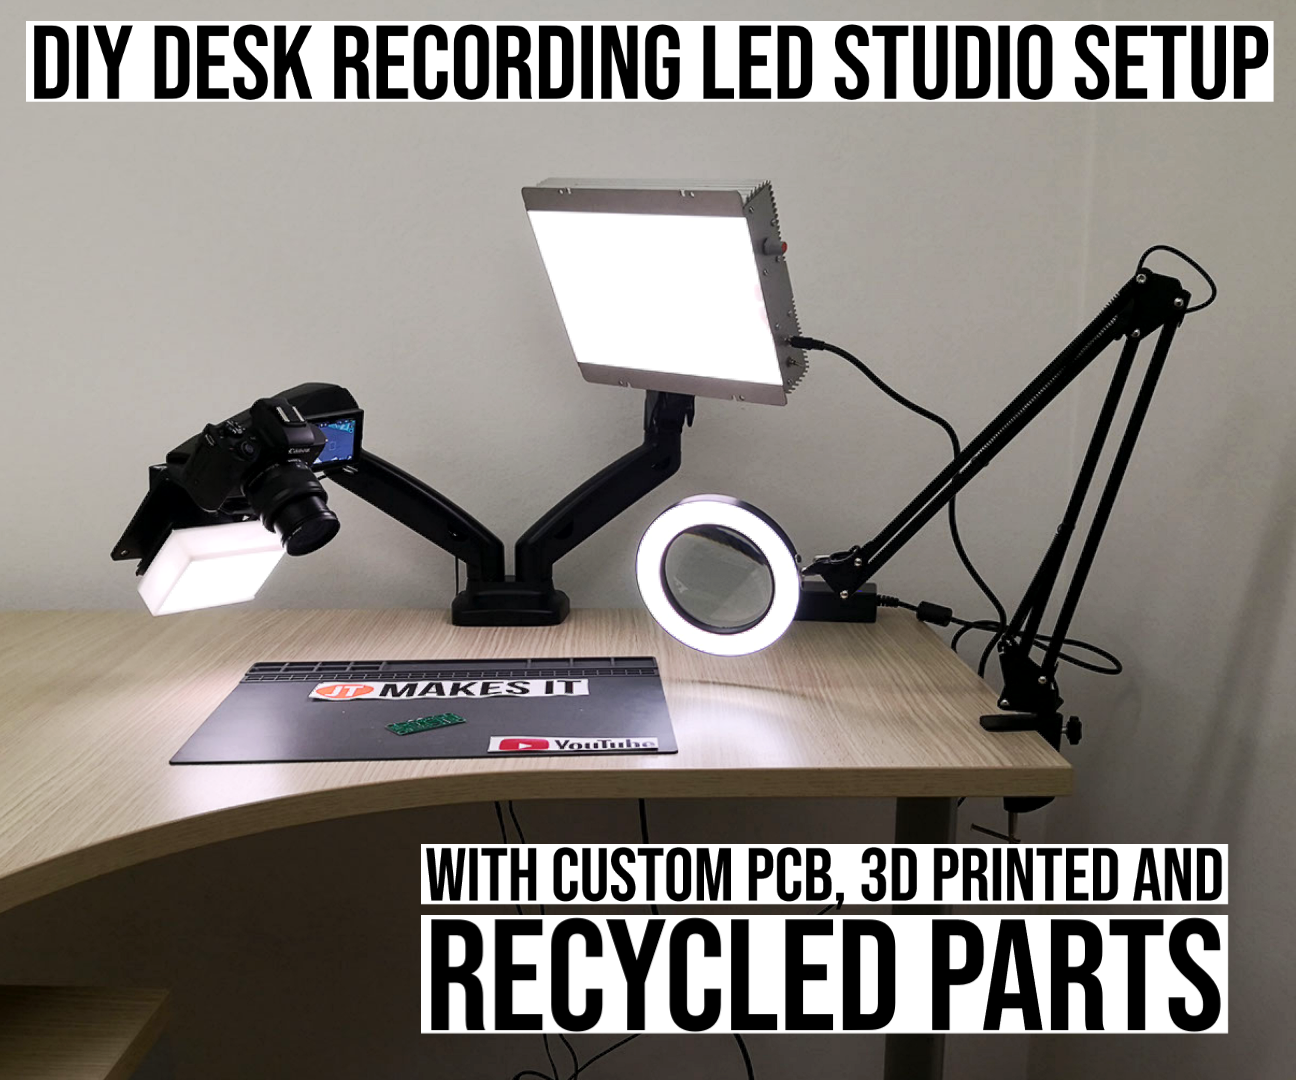 Pro Grade LED Studio Lights and Camera Mount From Scratch - 98 CRI